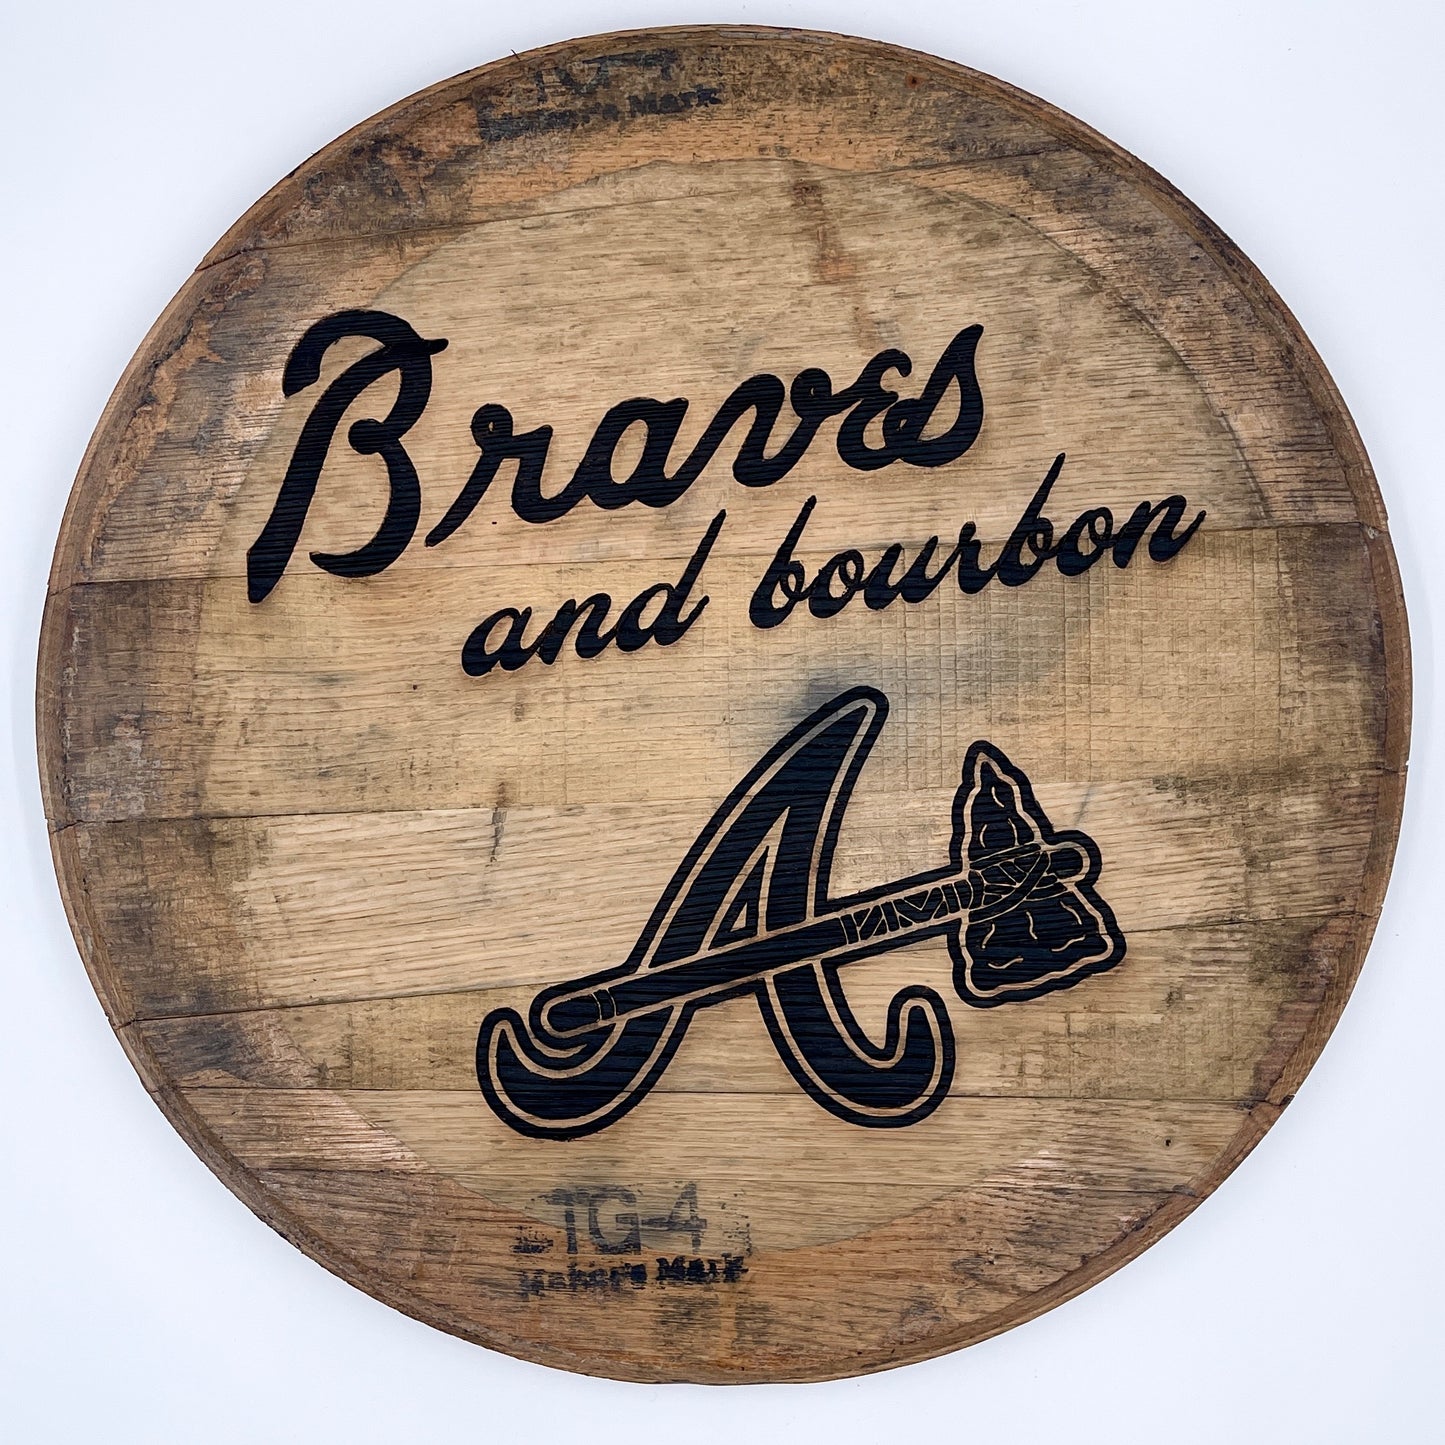 Braves and Bourbon